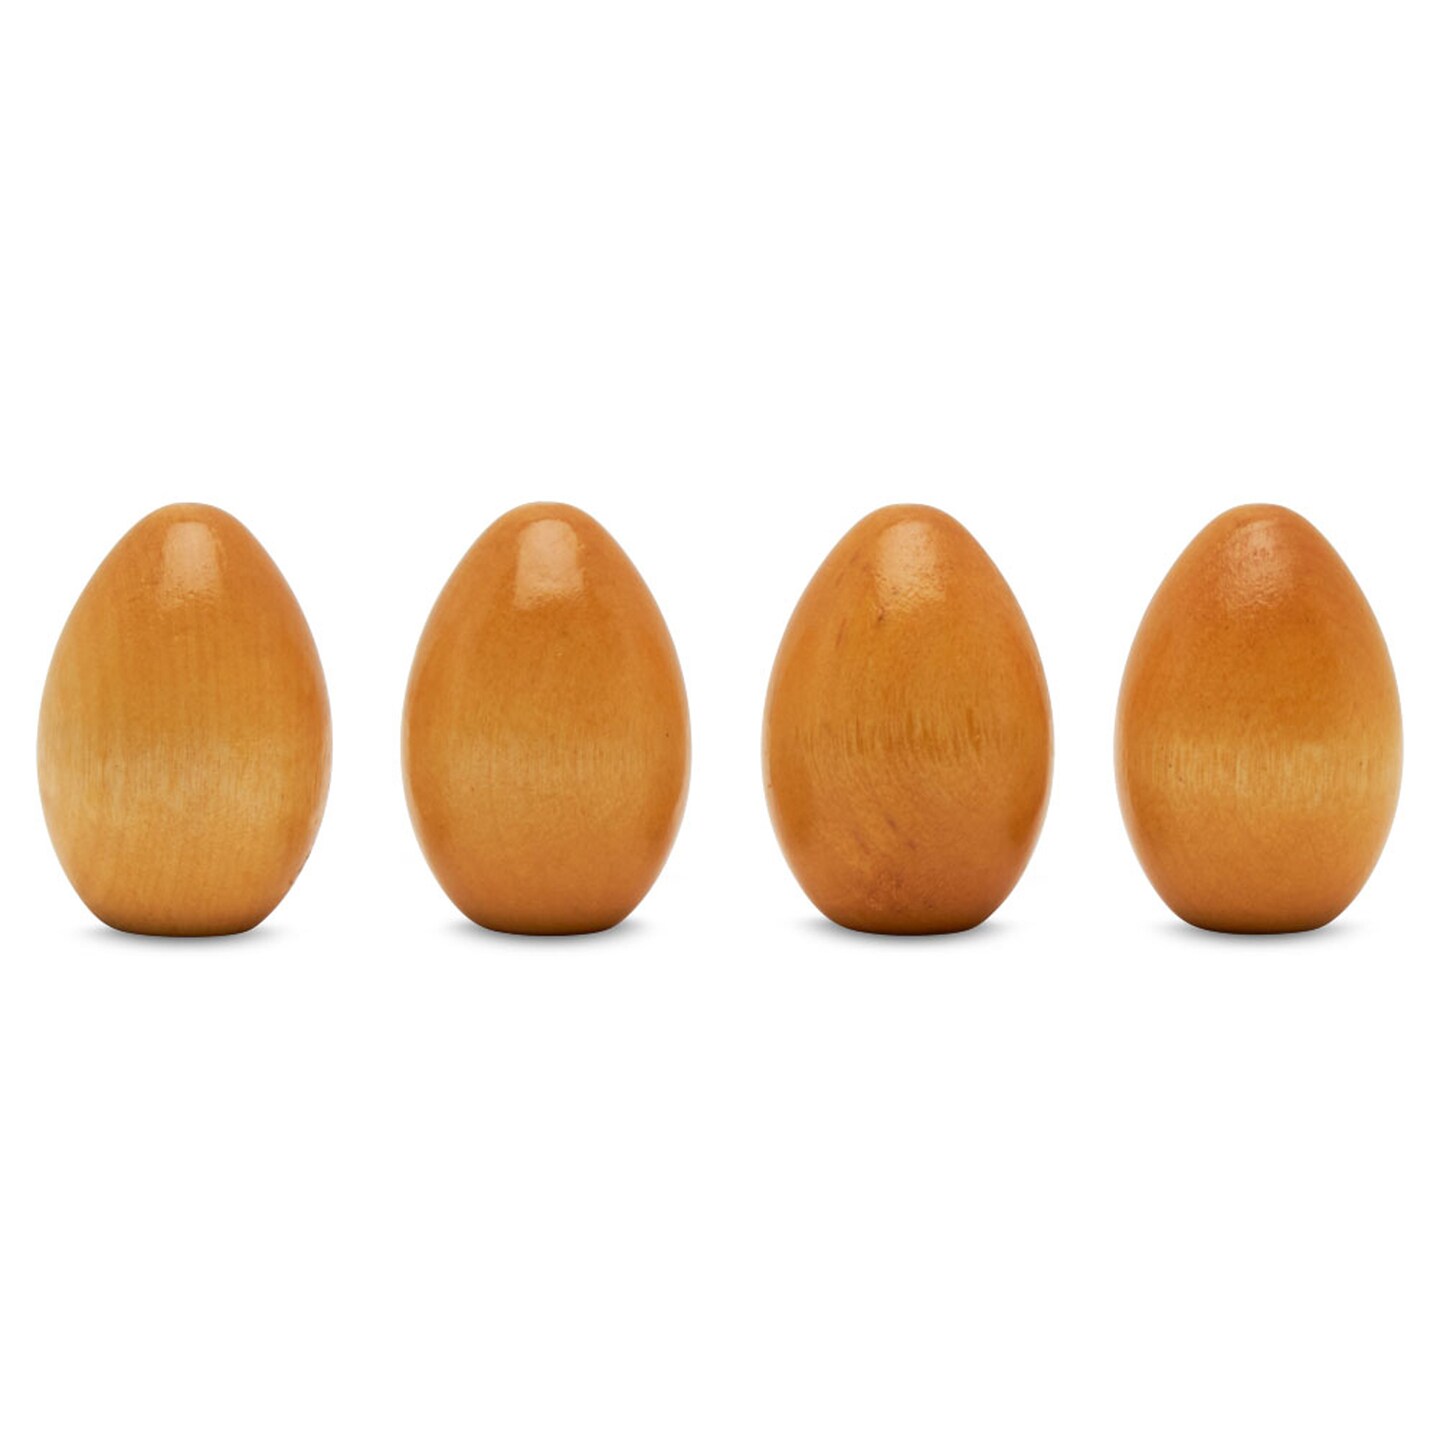 Wooden Eggs 2 inch, Varnished, Easter Ornaments |Woodpeckers